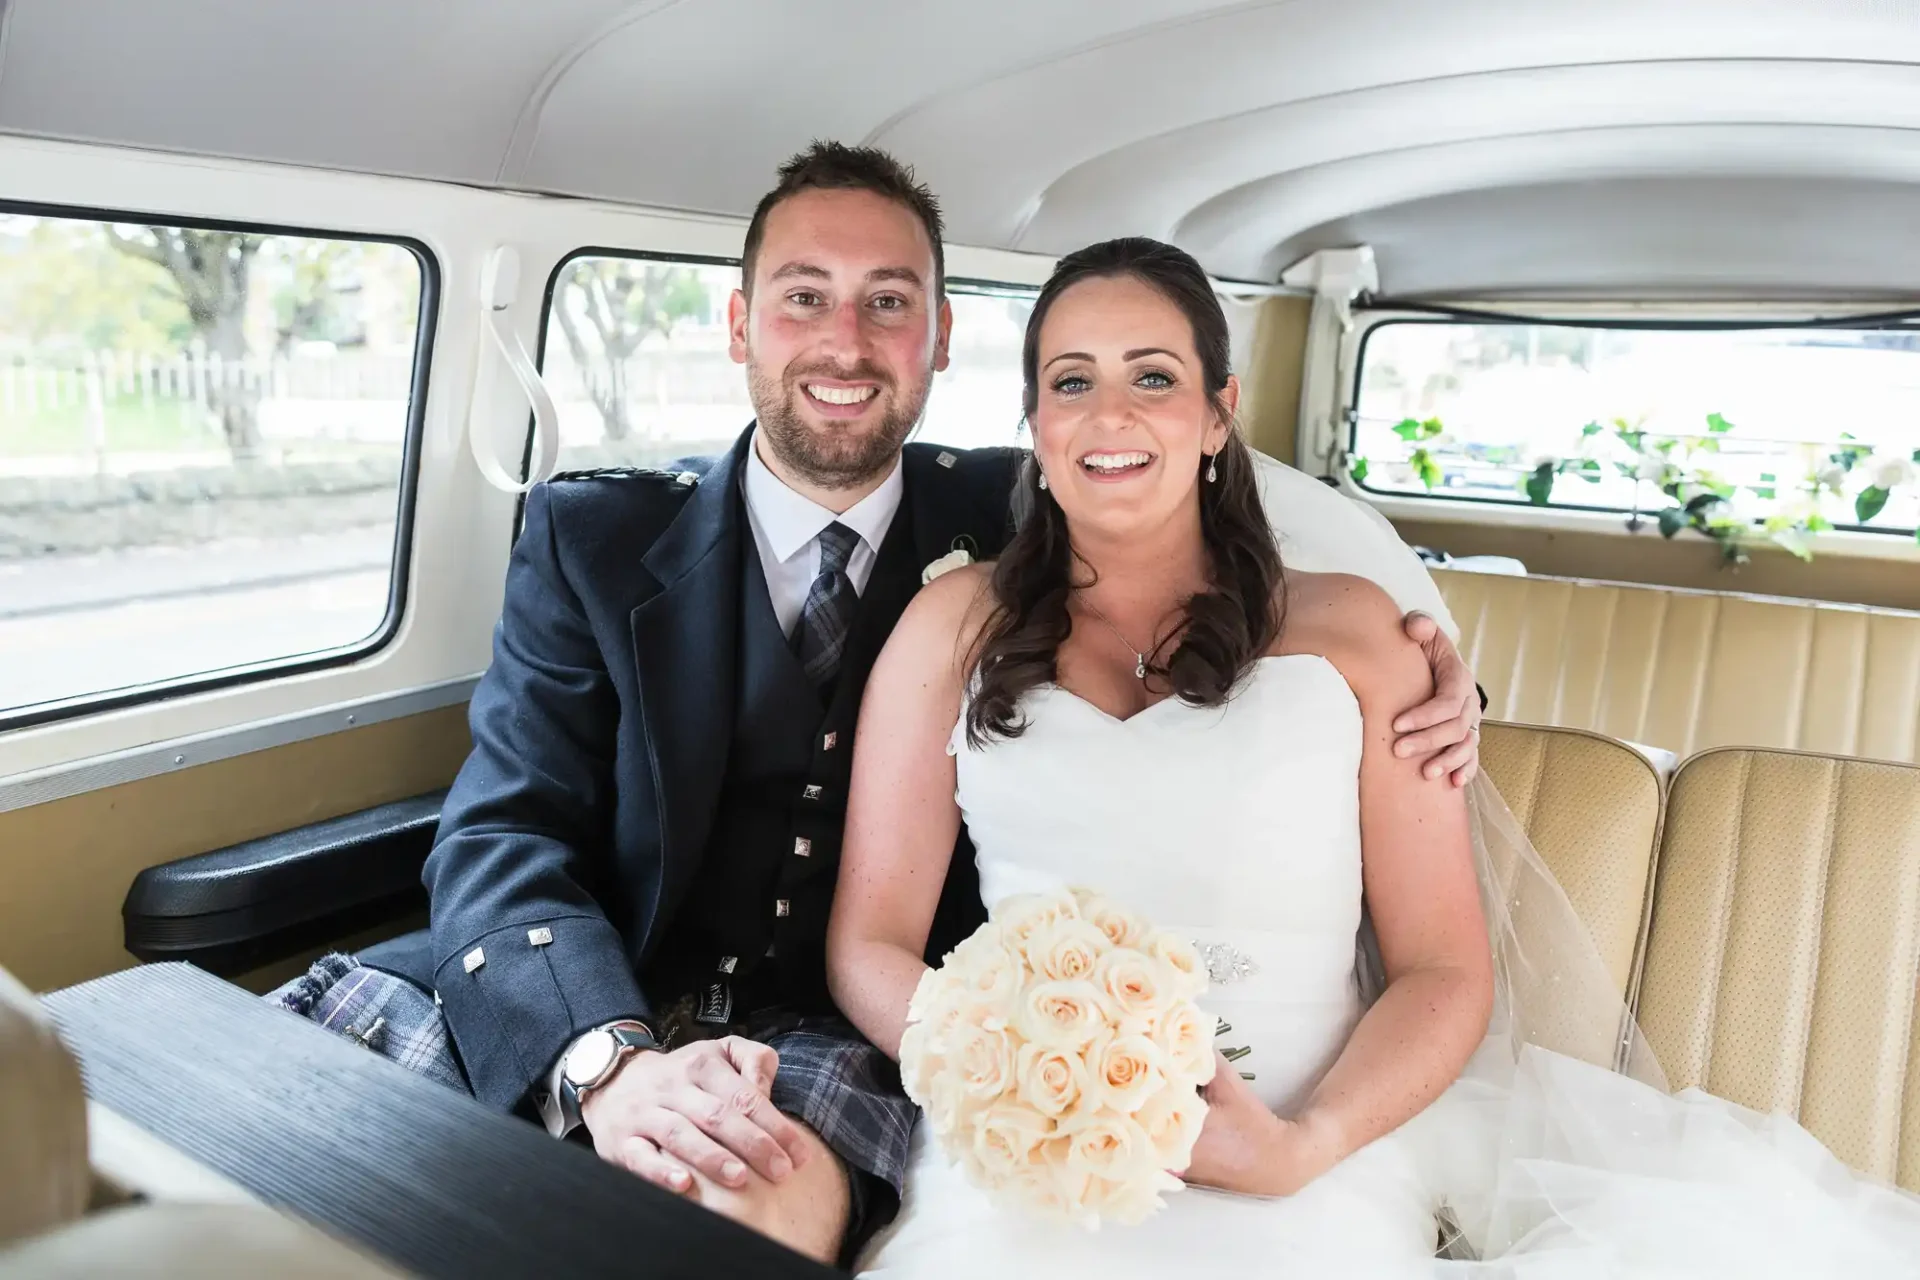 A newlywed couple smiling inside a vintage car, the groom in a kilt and the bride holding a bouquet of roses.